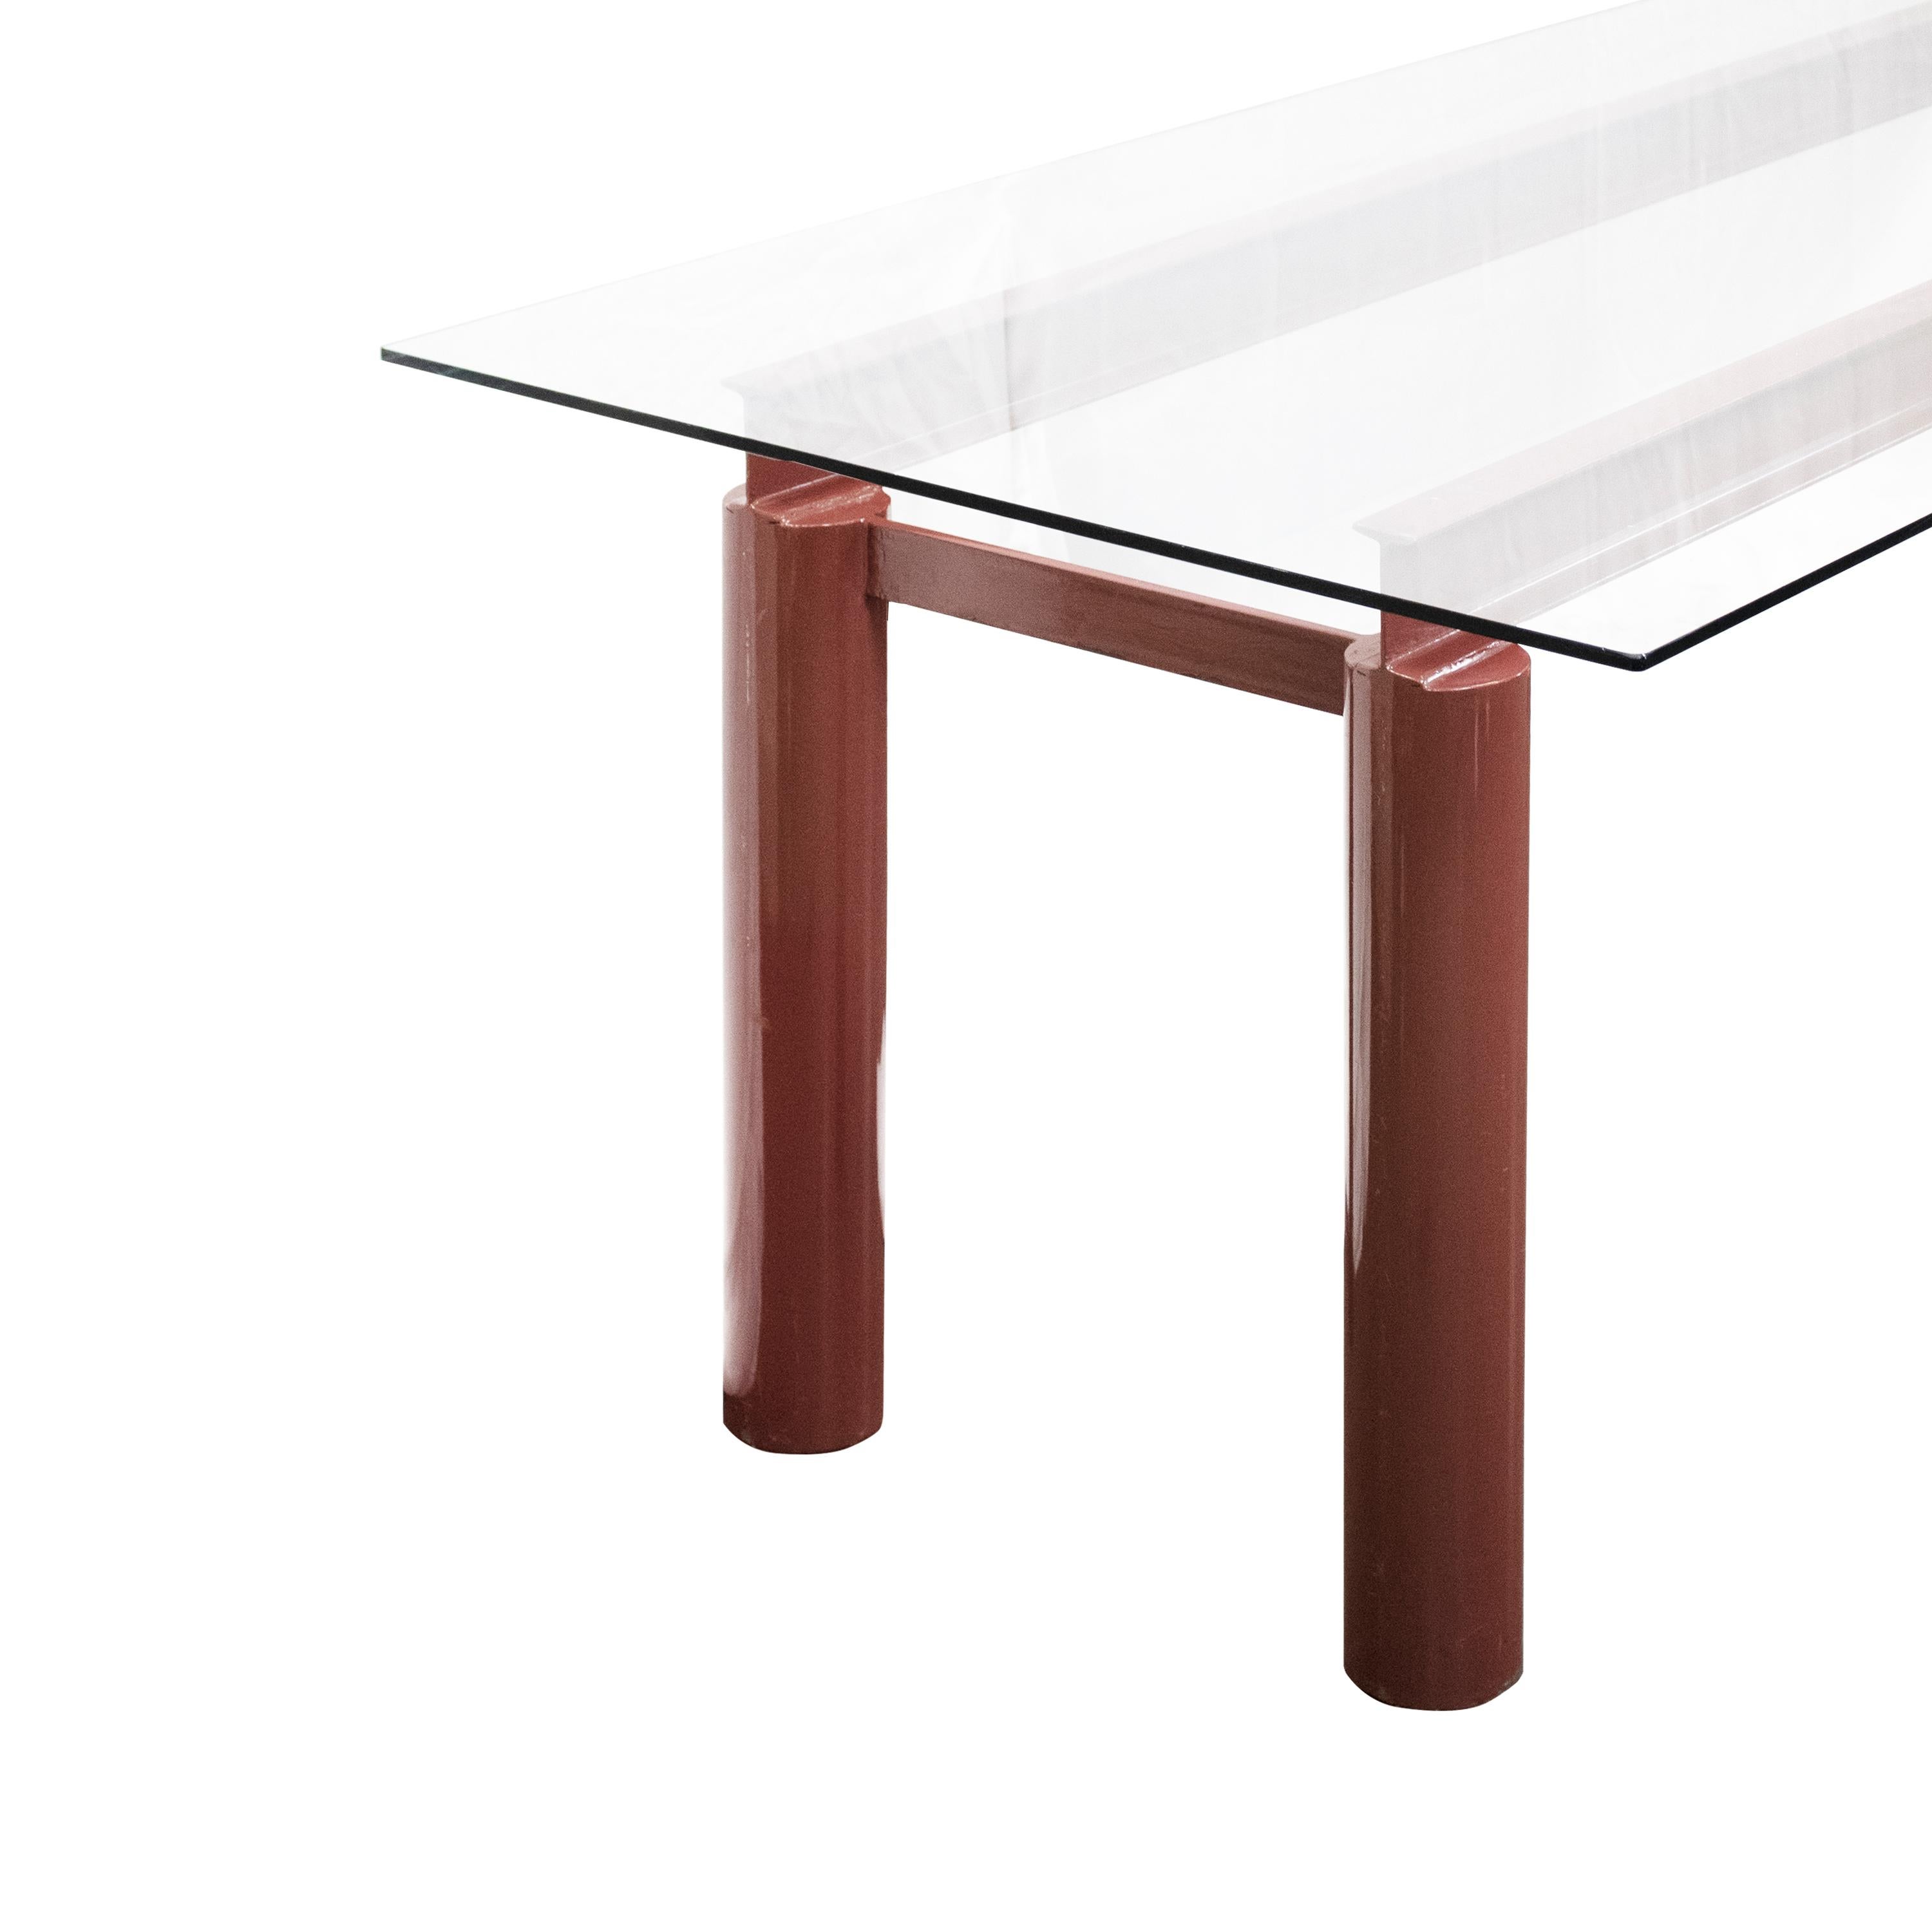 Italian Modern Bourdeaux Steel Dining Table with Glass Top 187 x 89 cm, Italia, 1970 For Sale